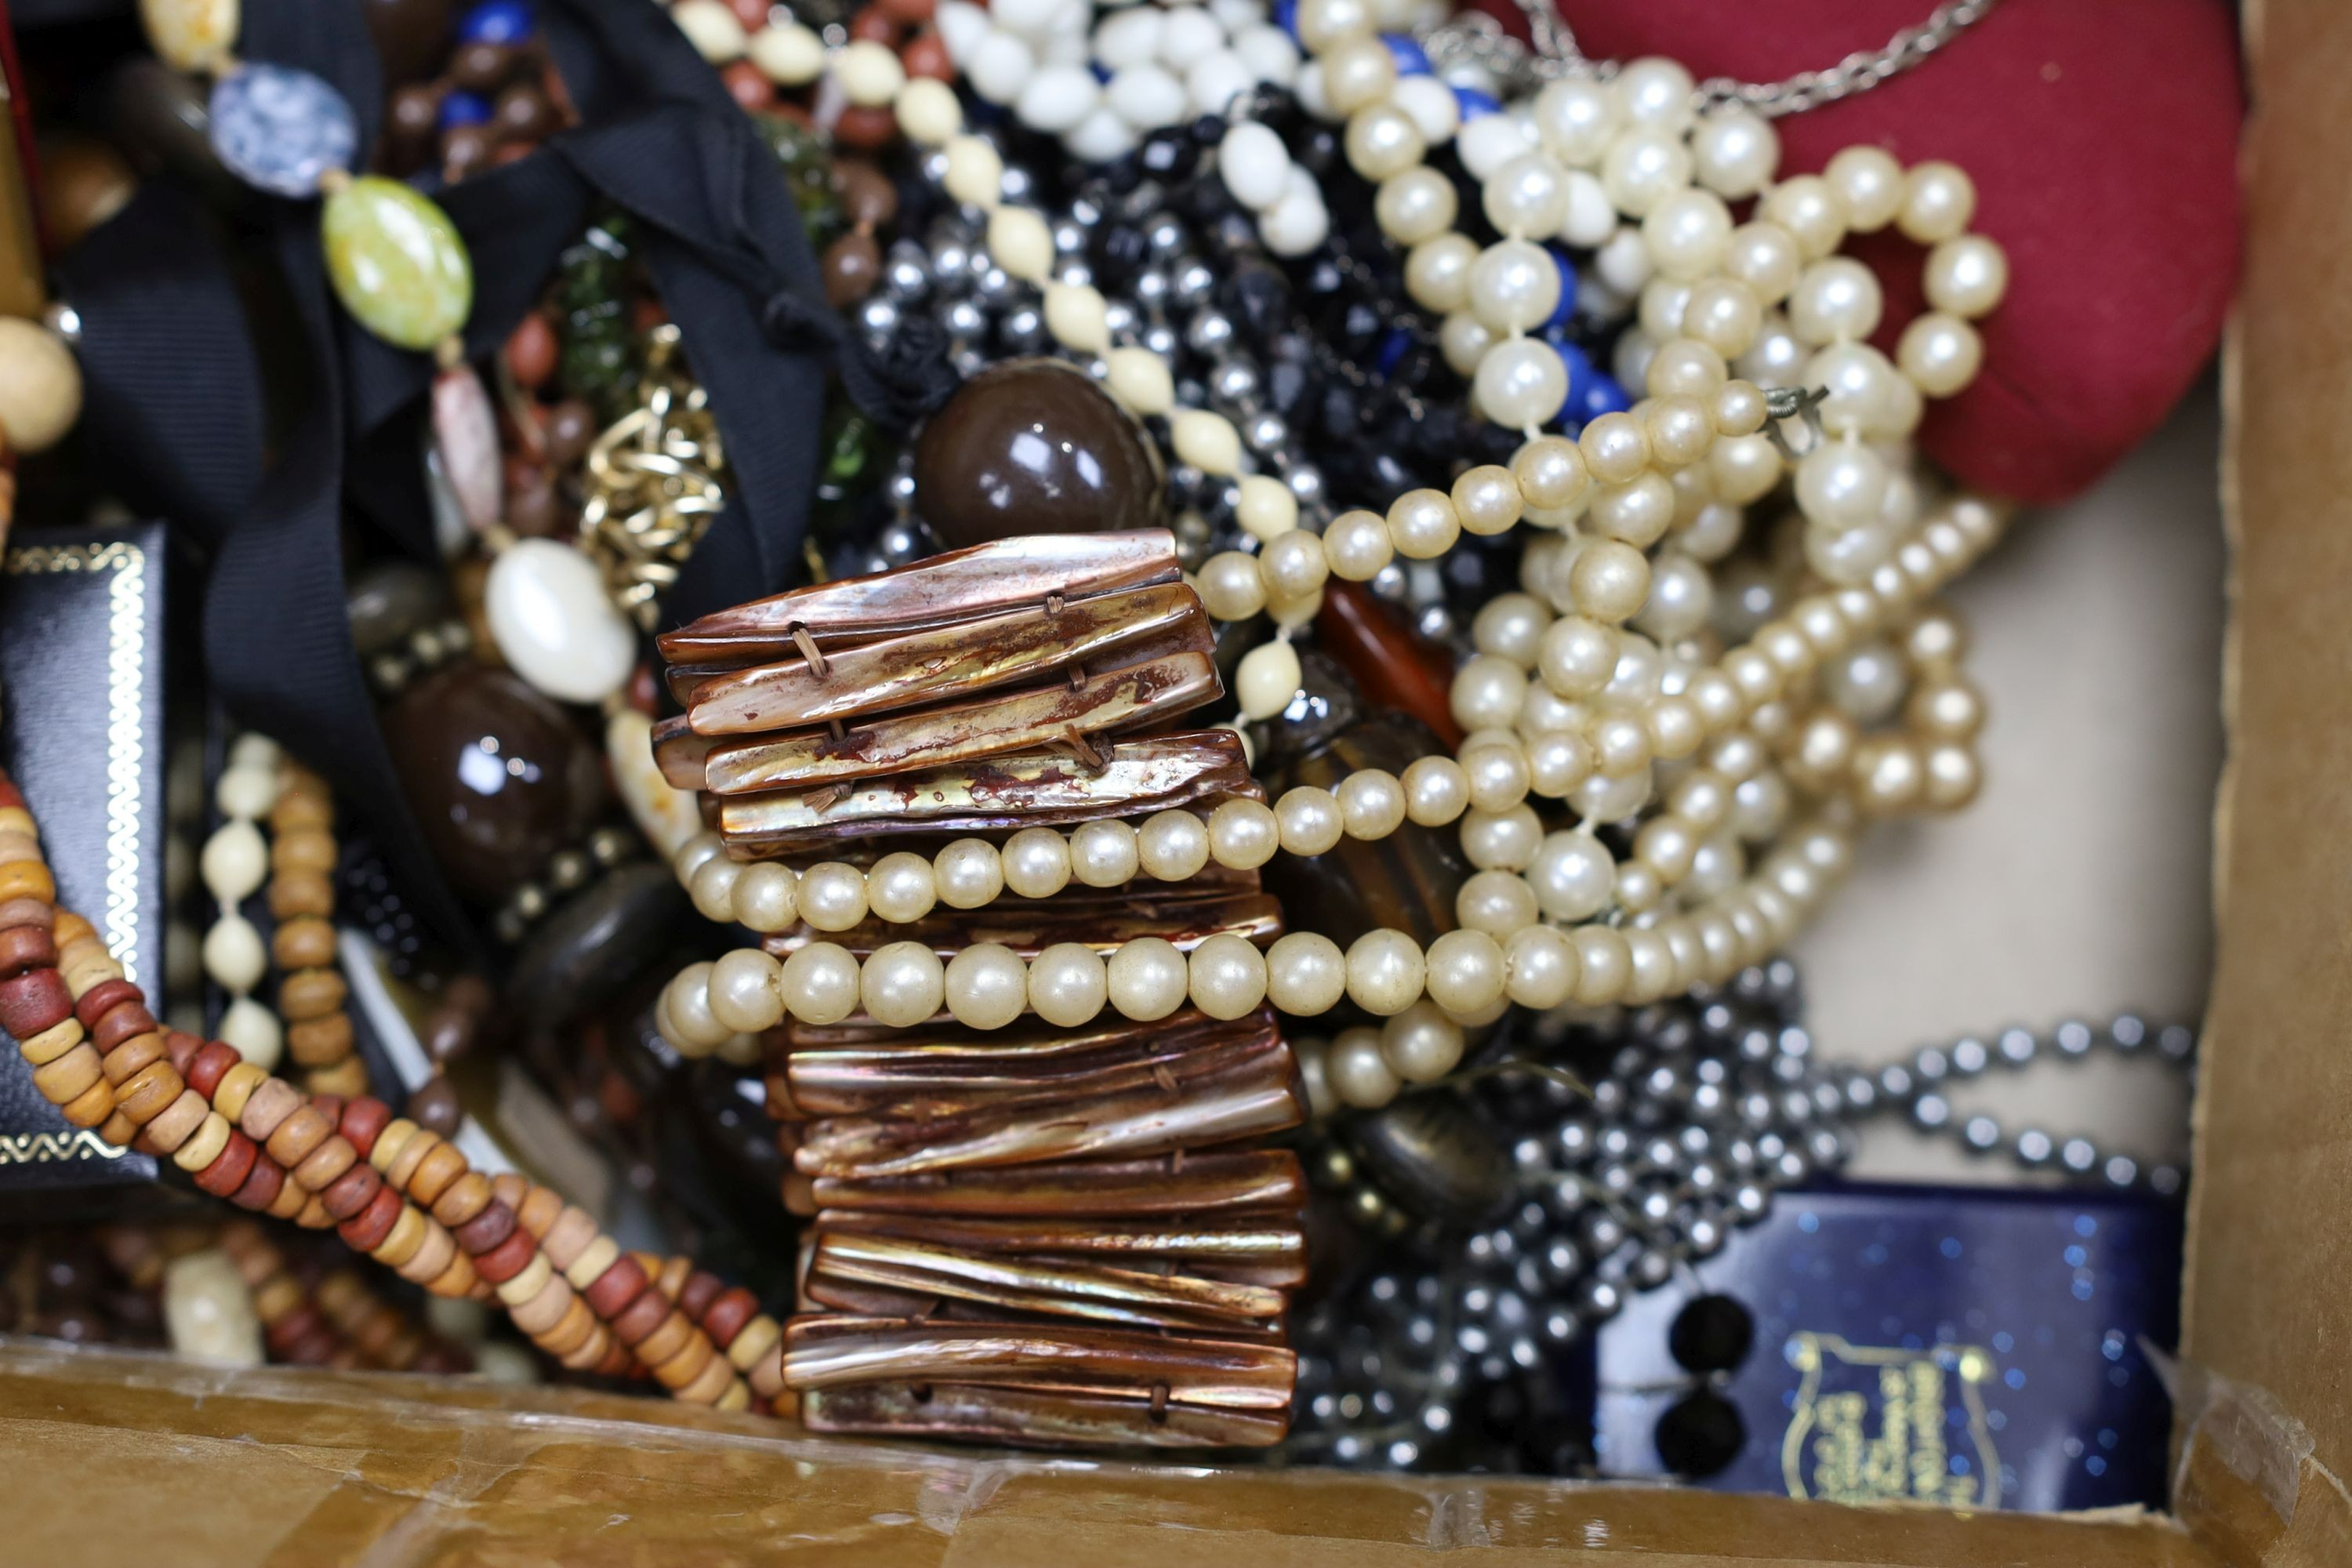 A quantity of assorted costume jewellery, including necklaces, brooches, etc.